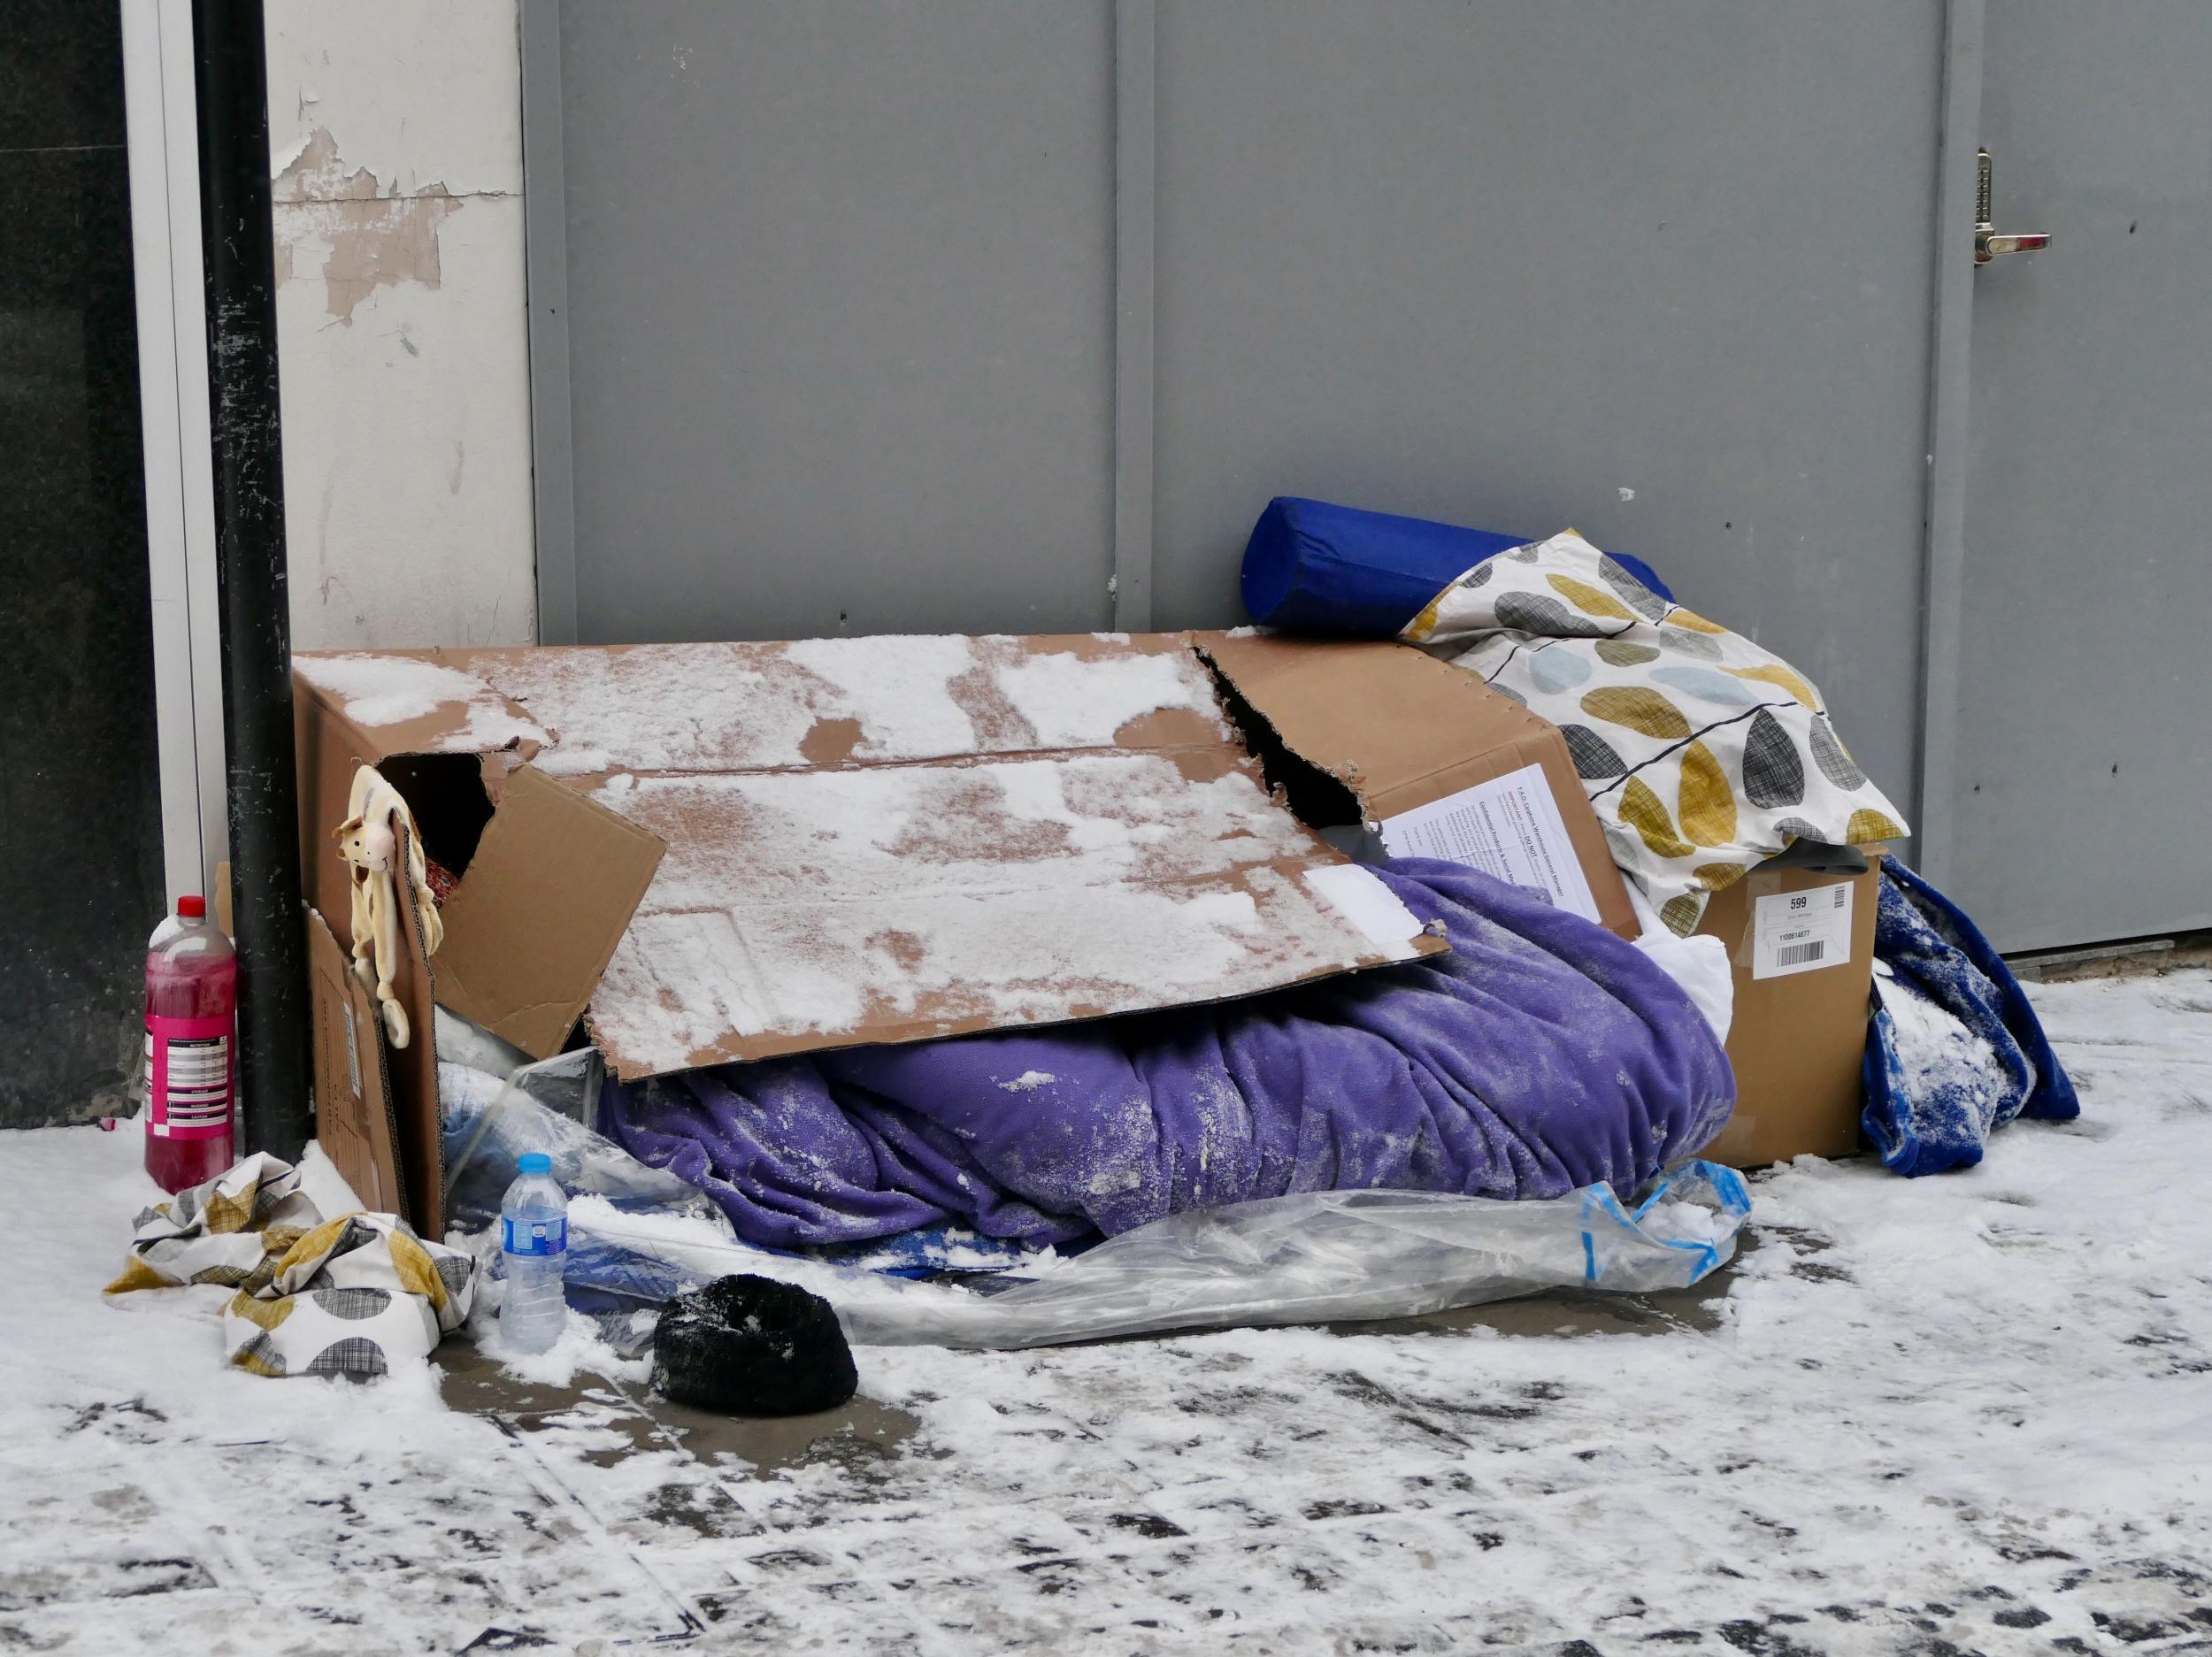 According to figures, the average age of a rough sleeper at death was 43, nearly half the UK life expectancy, while around 90 per cent per cent of those who died in the last five years were men, when the gender was provided